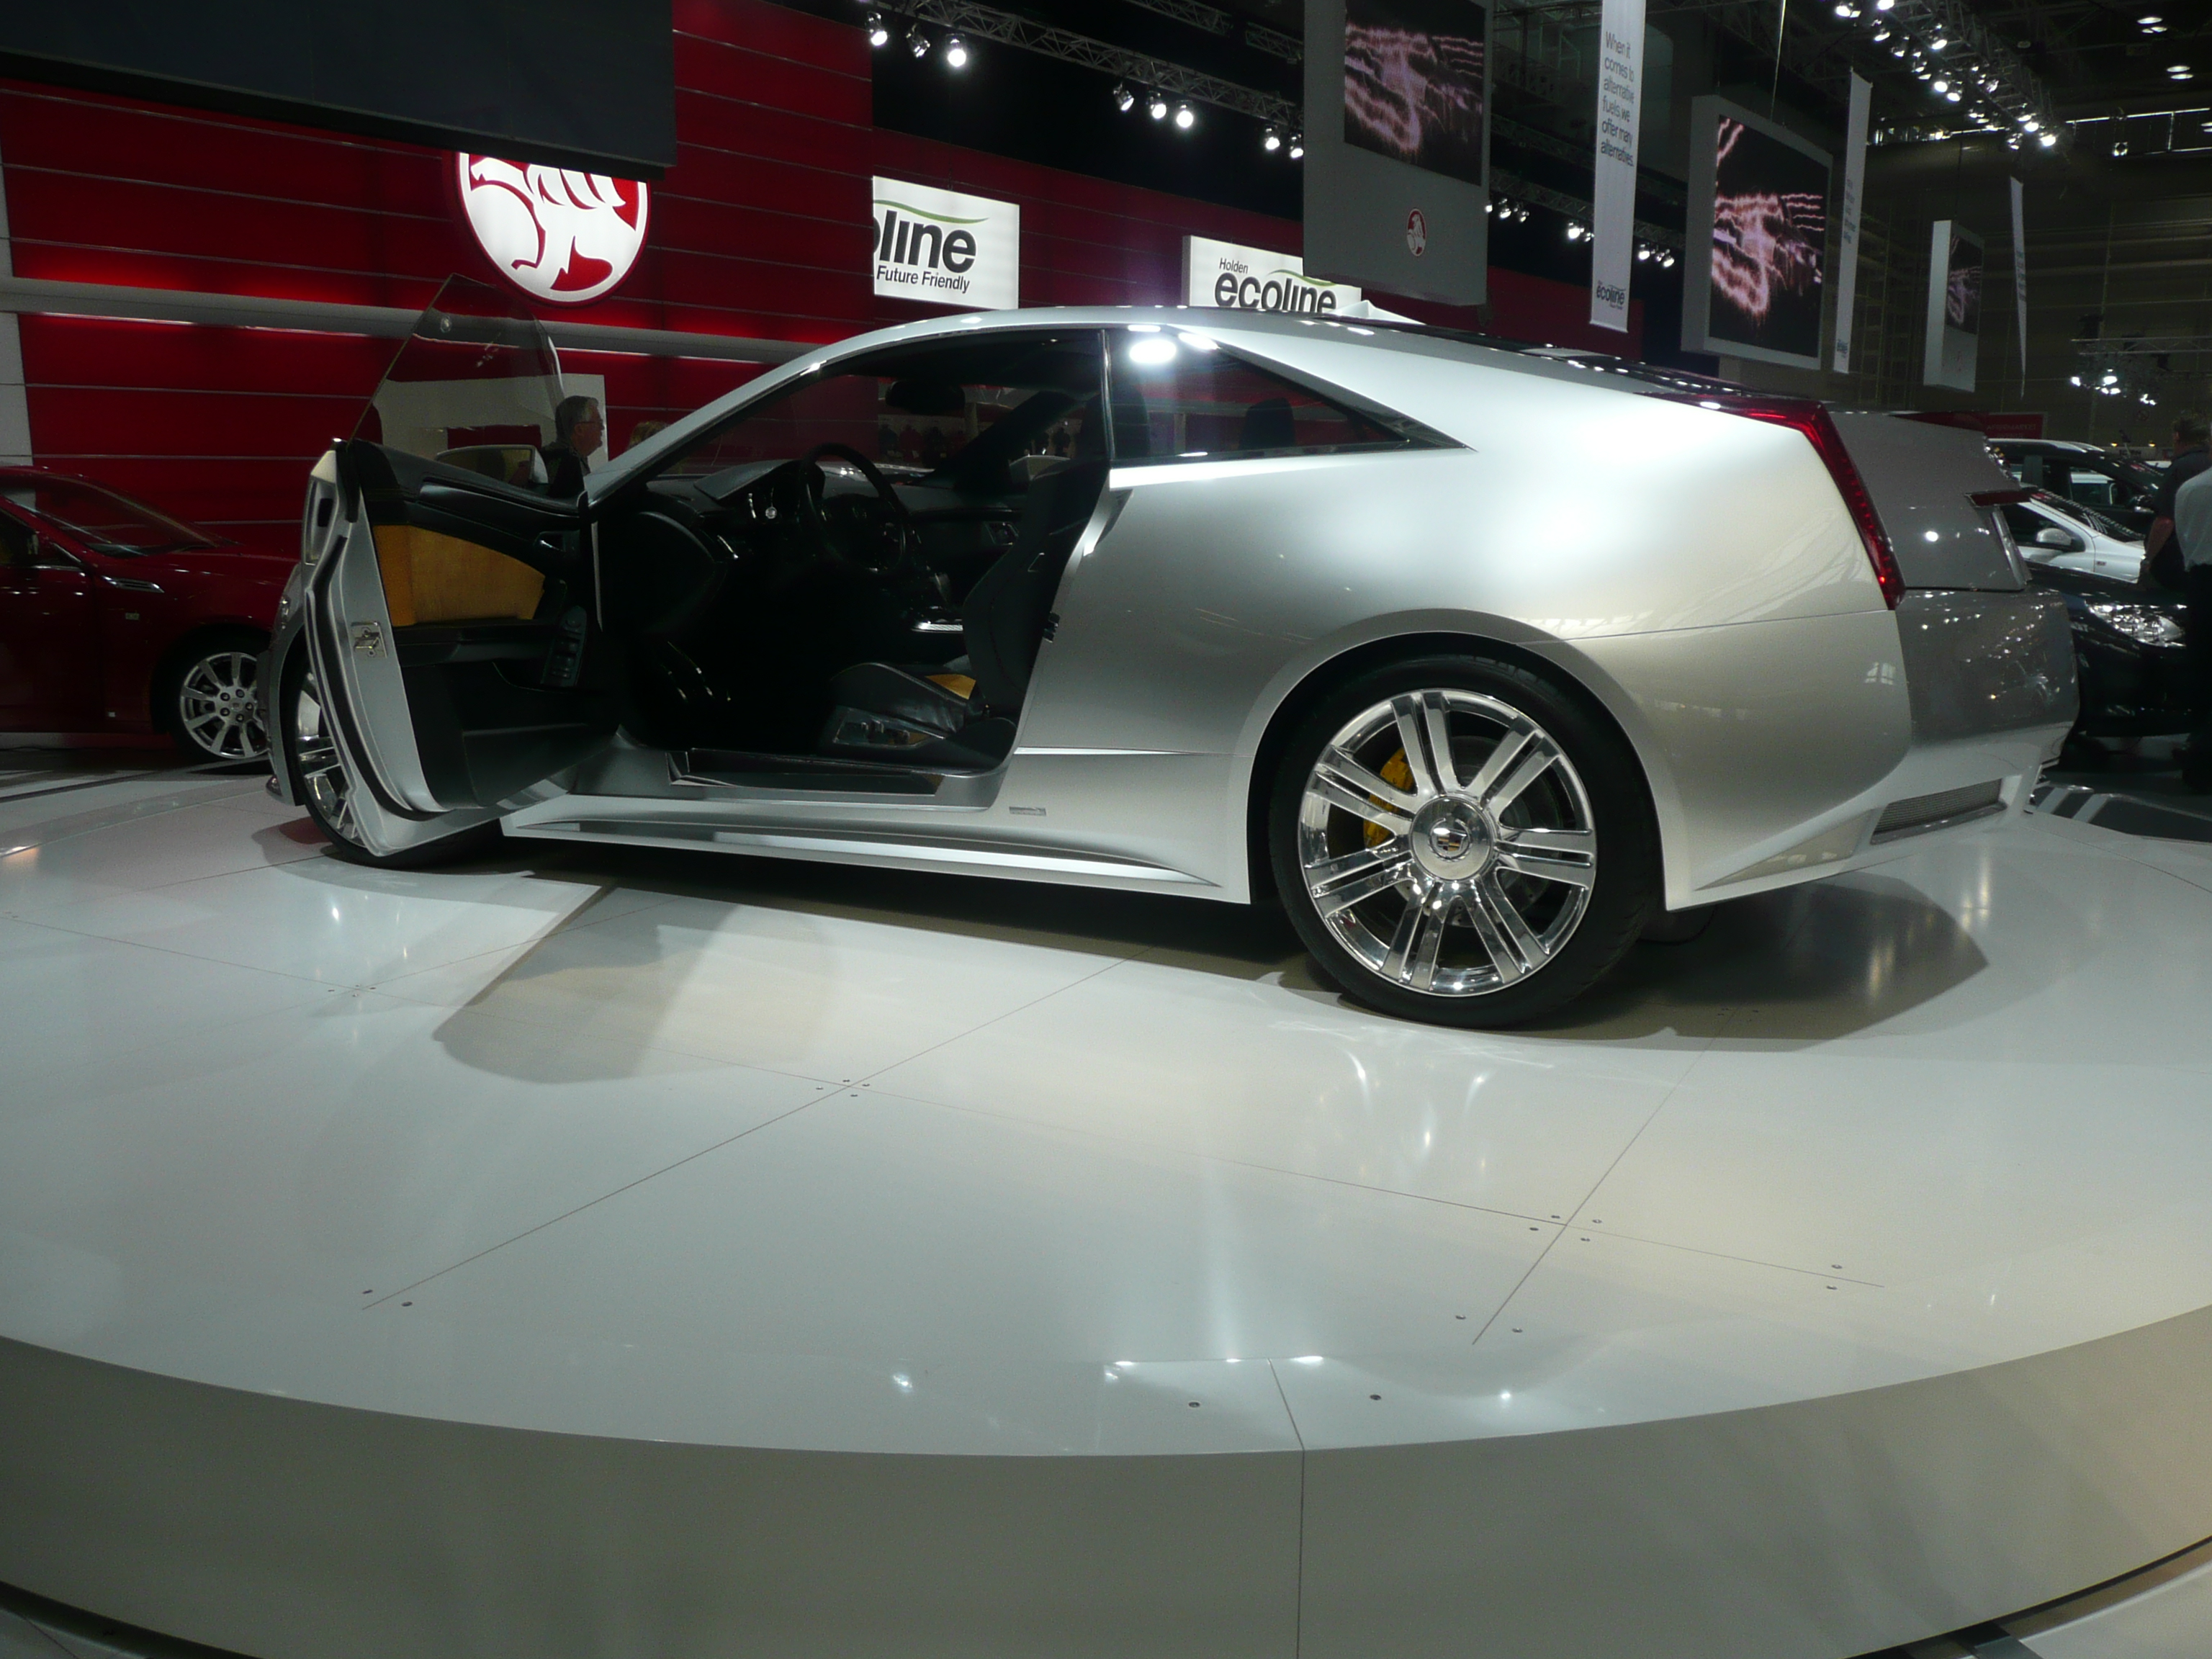 2008 Cadillac CTS coupe (concept)